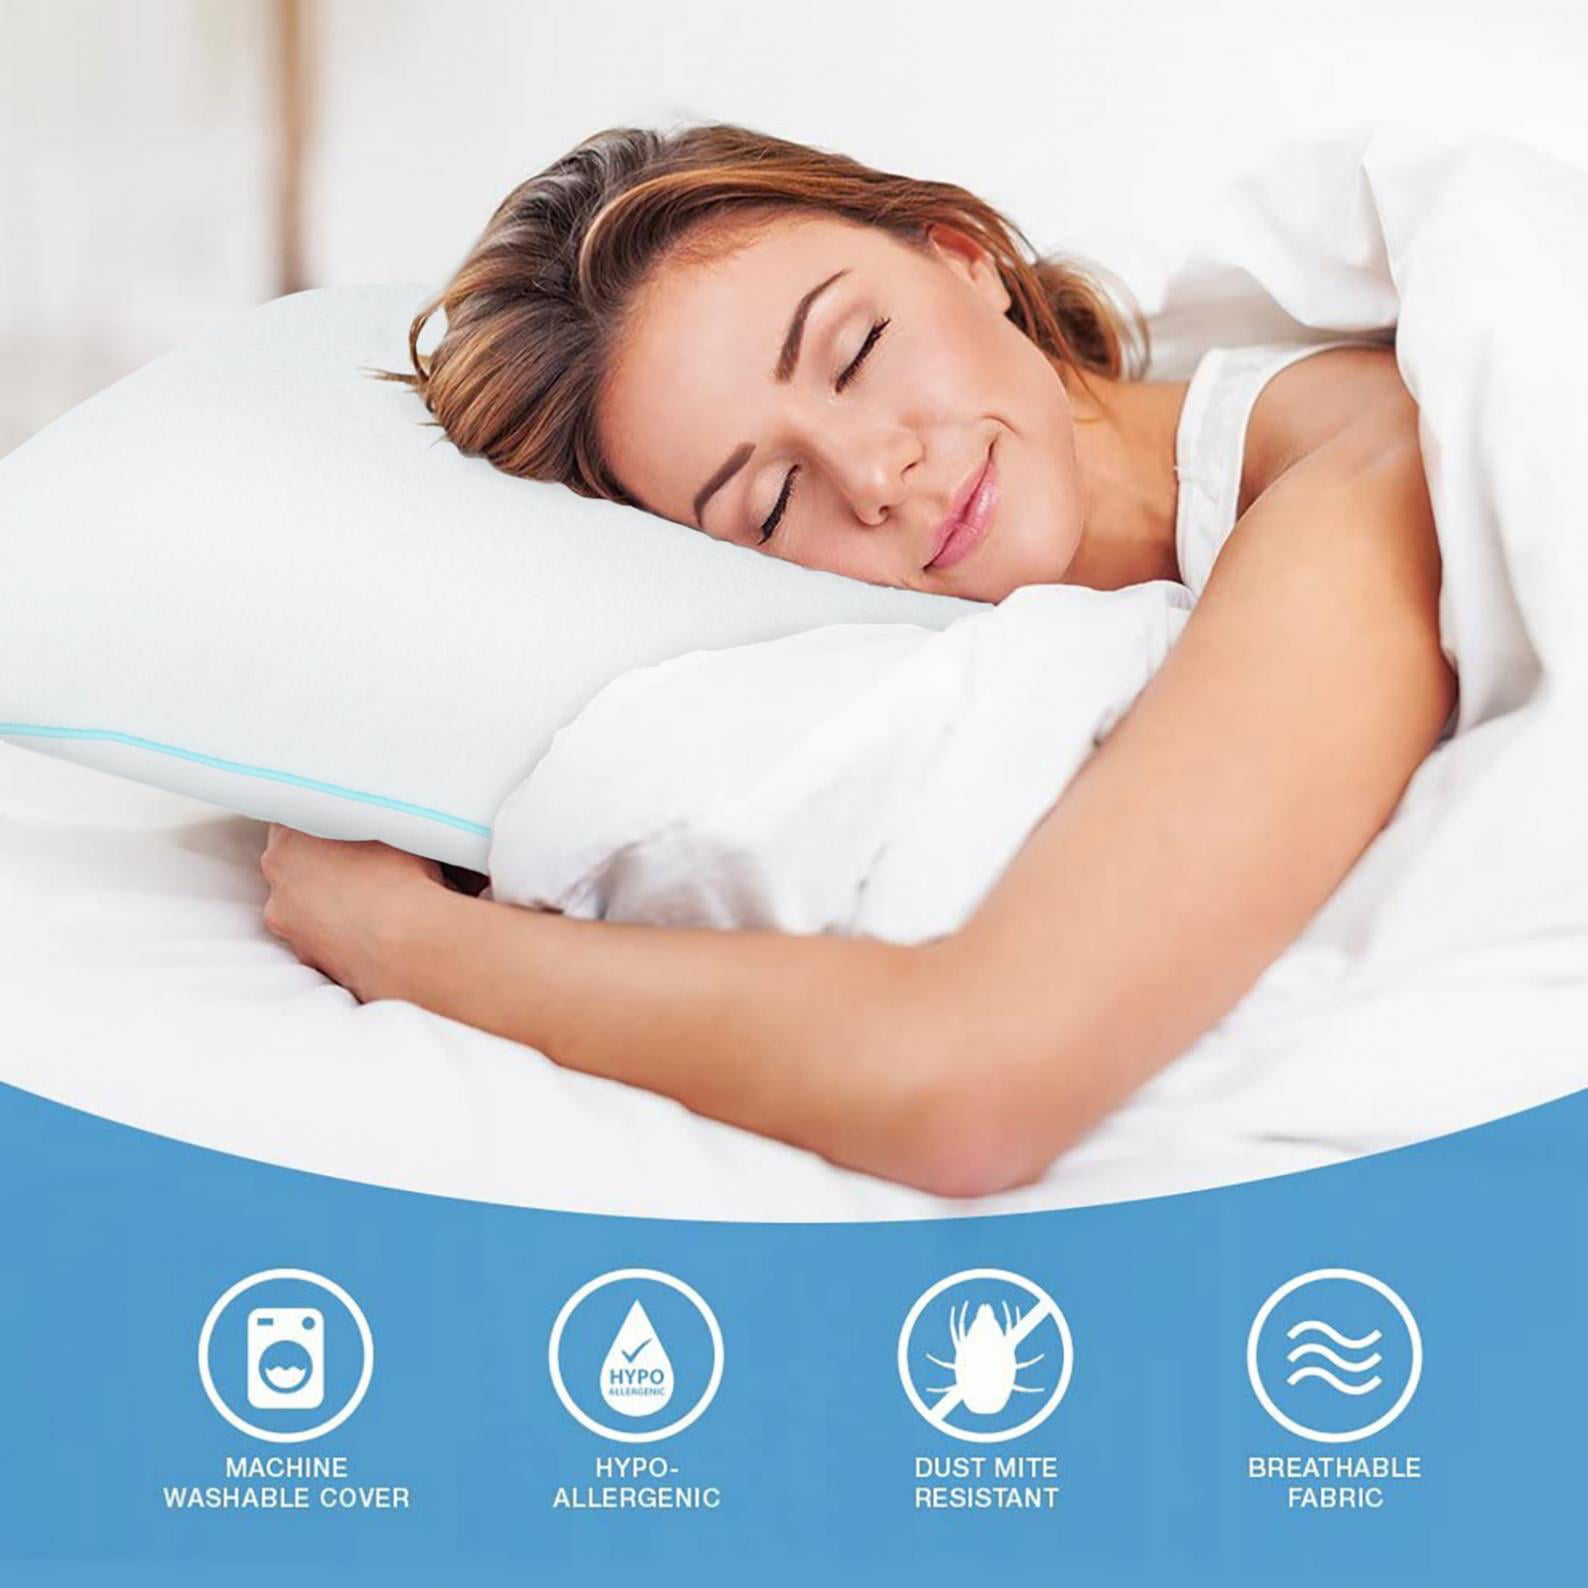 The Slumber Company Premium Adjustable Shredded Memory Foam Pillow Great for Neck Pain Relief for Side Stomach or Back Sleepers